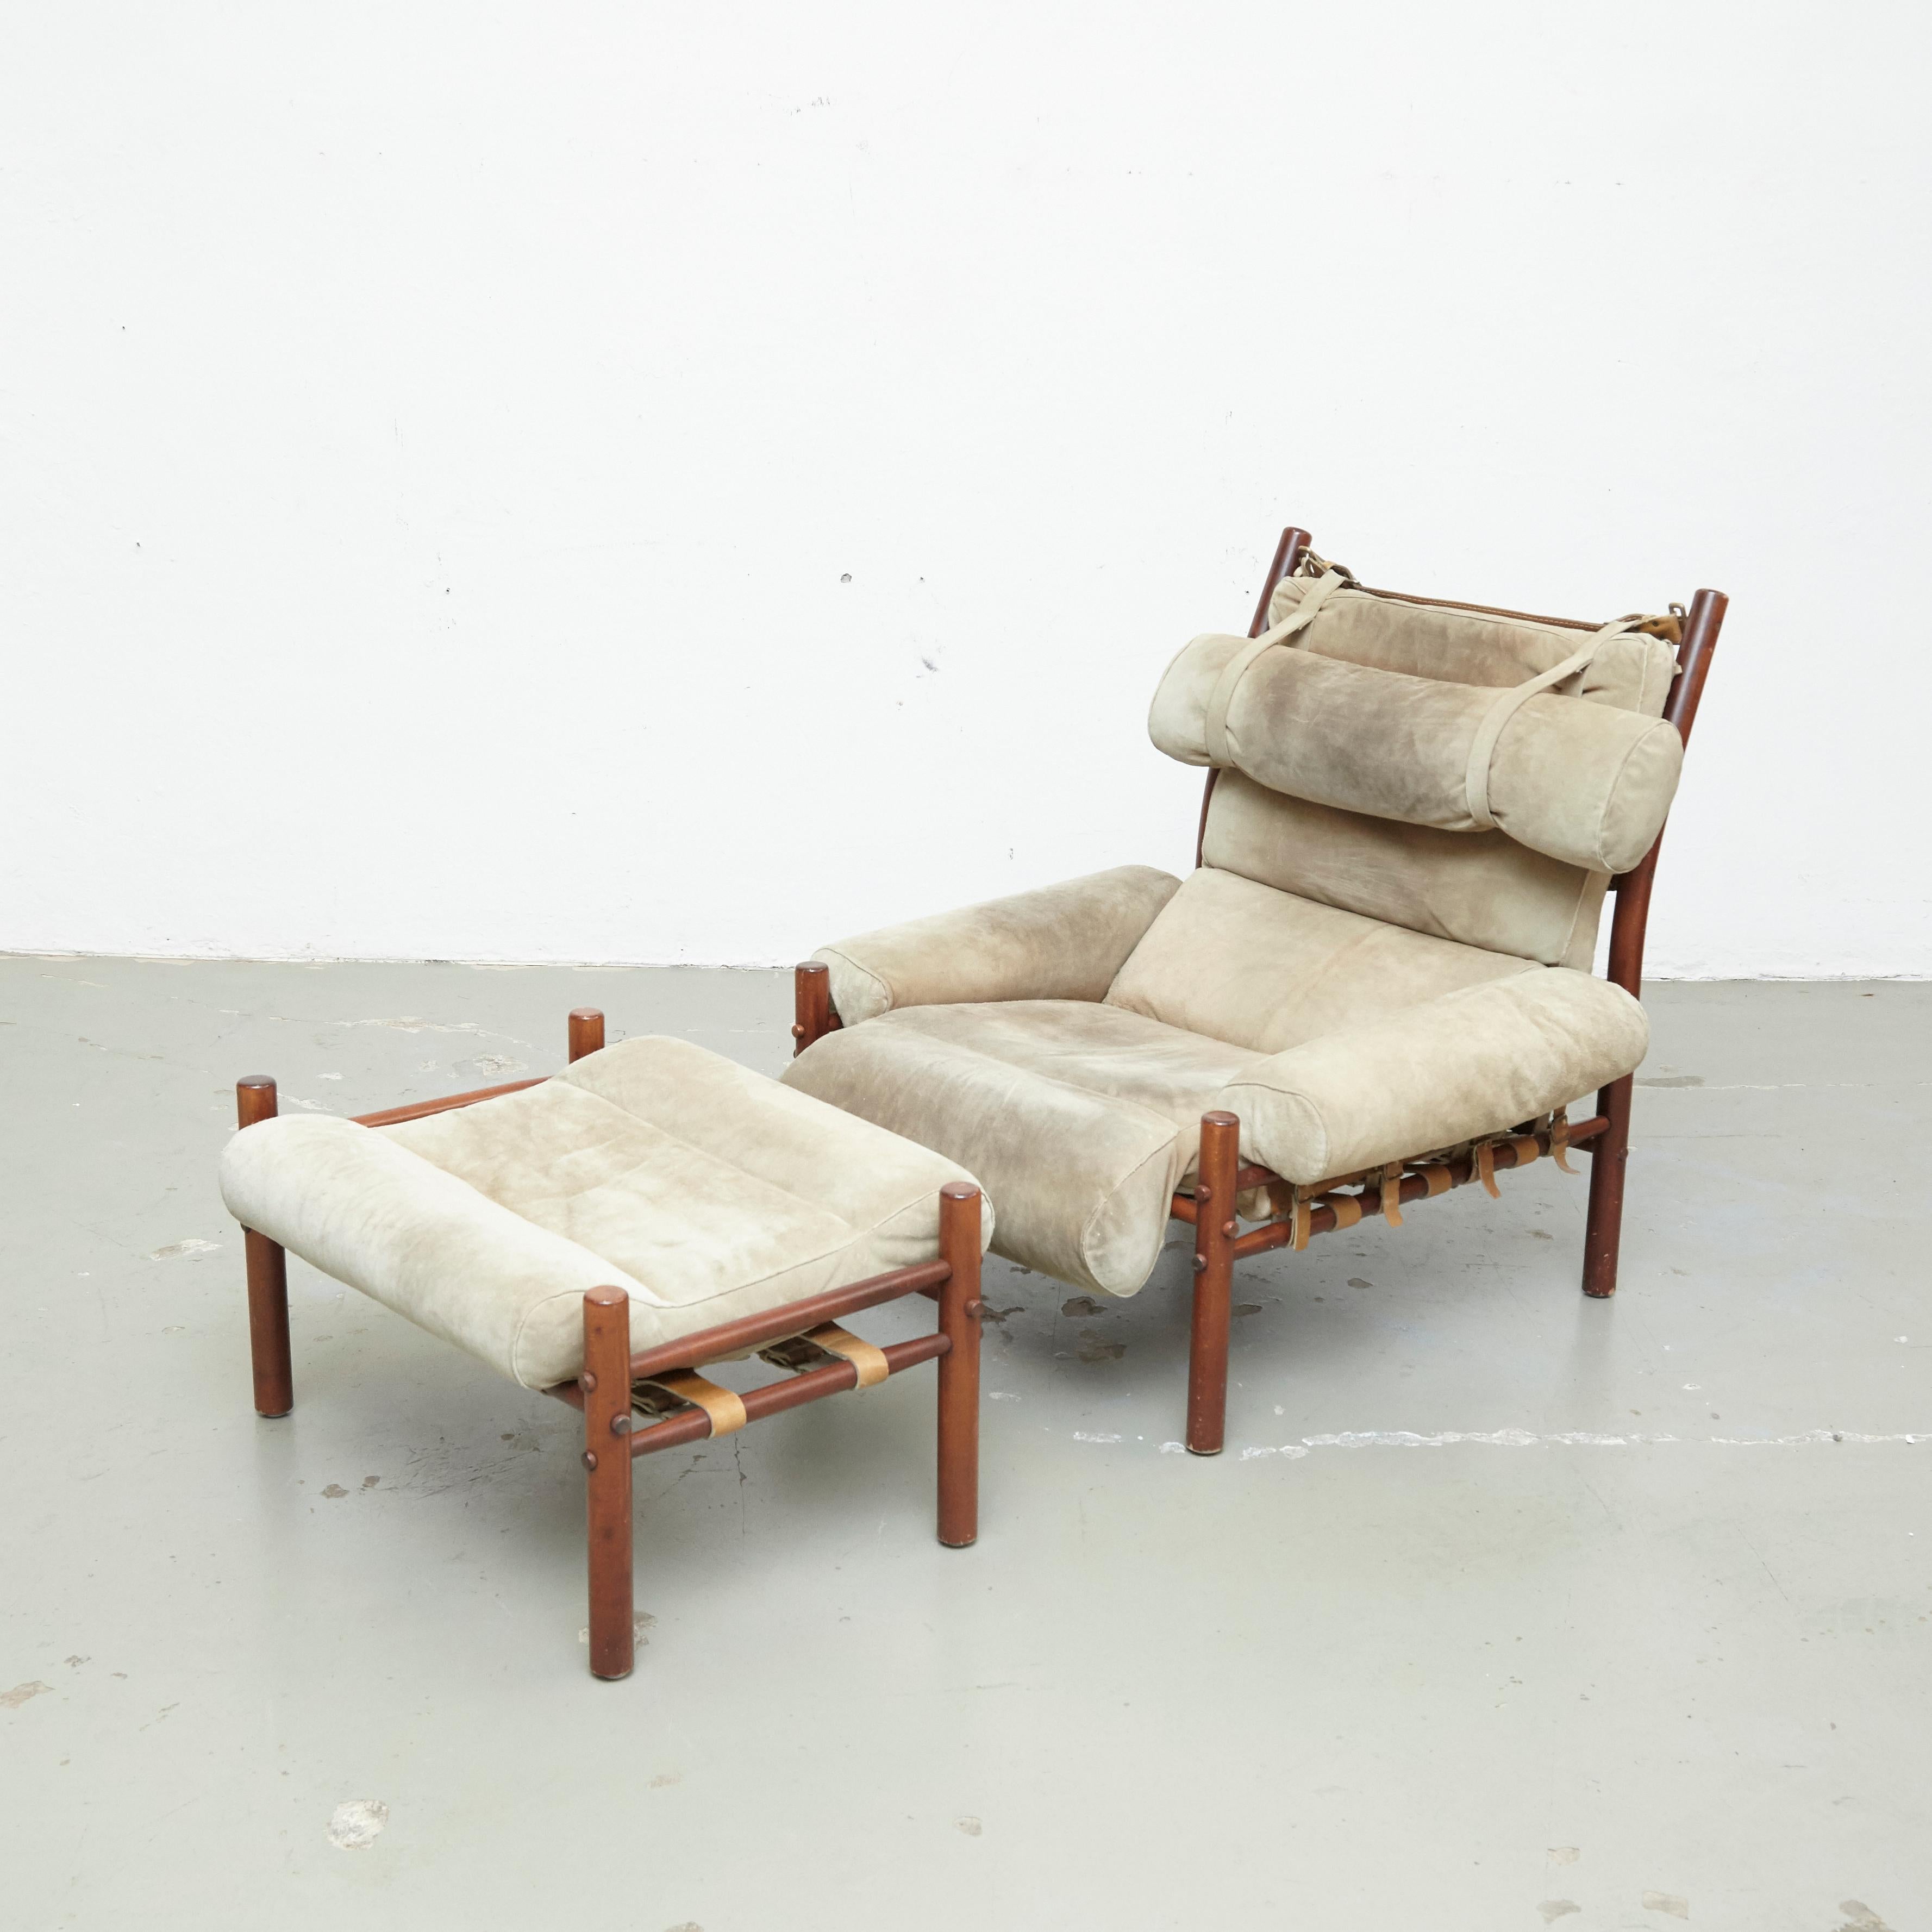 Arne Norell Inca easychair and ottoman manufactured by Norell Mobel, Sweden, circa 1970.

In original condition, preserving a beautiful patina. 

Arne Norell (1917-1971) was a Swedish furniture designer. In 1958, he founded MöBel AB Arne Norell